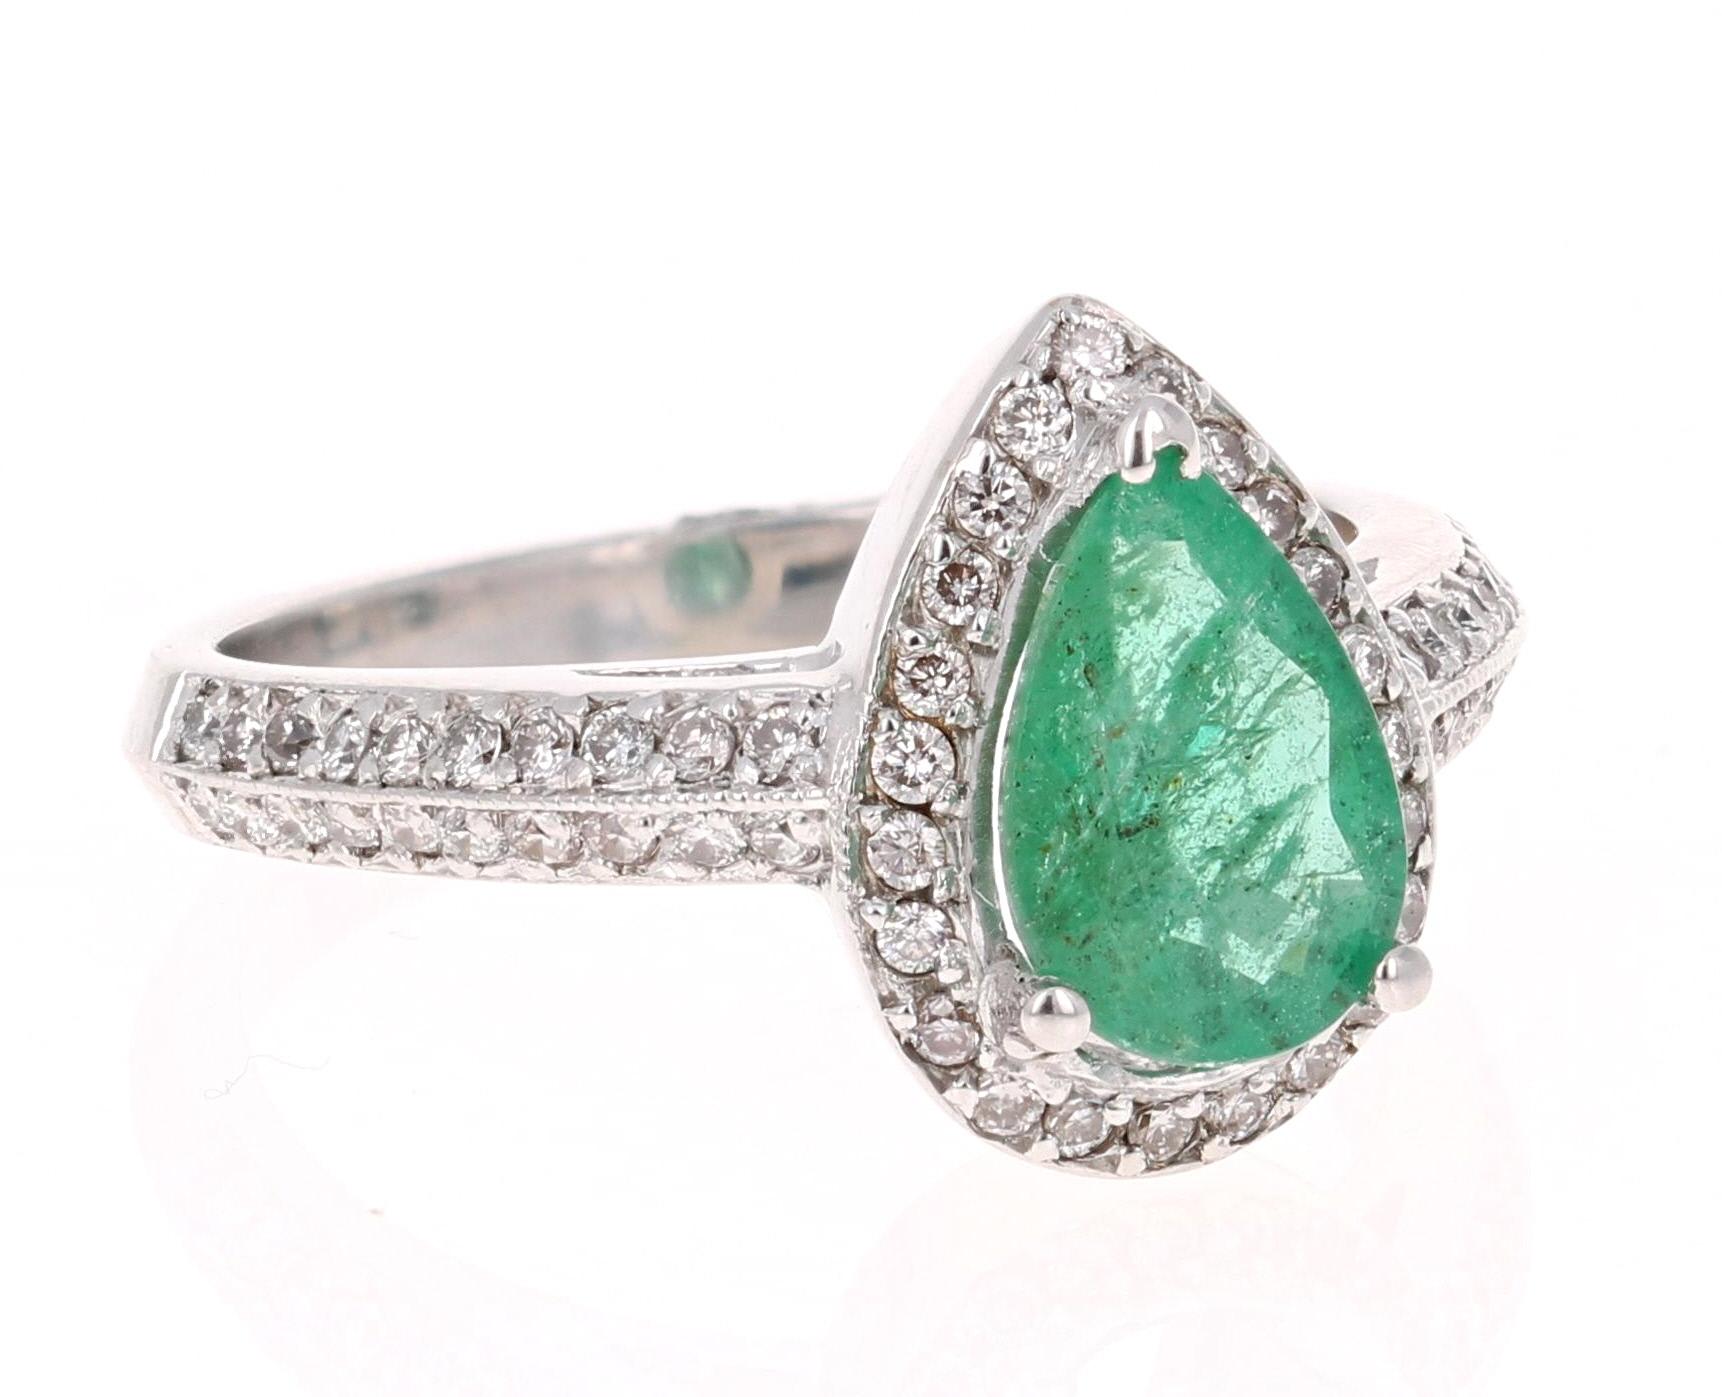 A simple setting with a beautiful natural Pear Cut Emerald that weighs 1.12 Carats, surrounded by 64 Round Cut Diamonds weighing 0.40 Carats. The total carat weight of the ring is 1.52 Carats. 

The Pear Cut Emerald measures at 9 mm x 6 mm and the